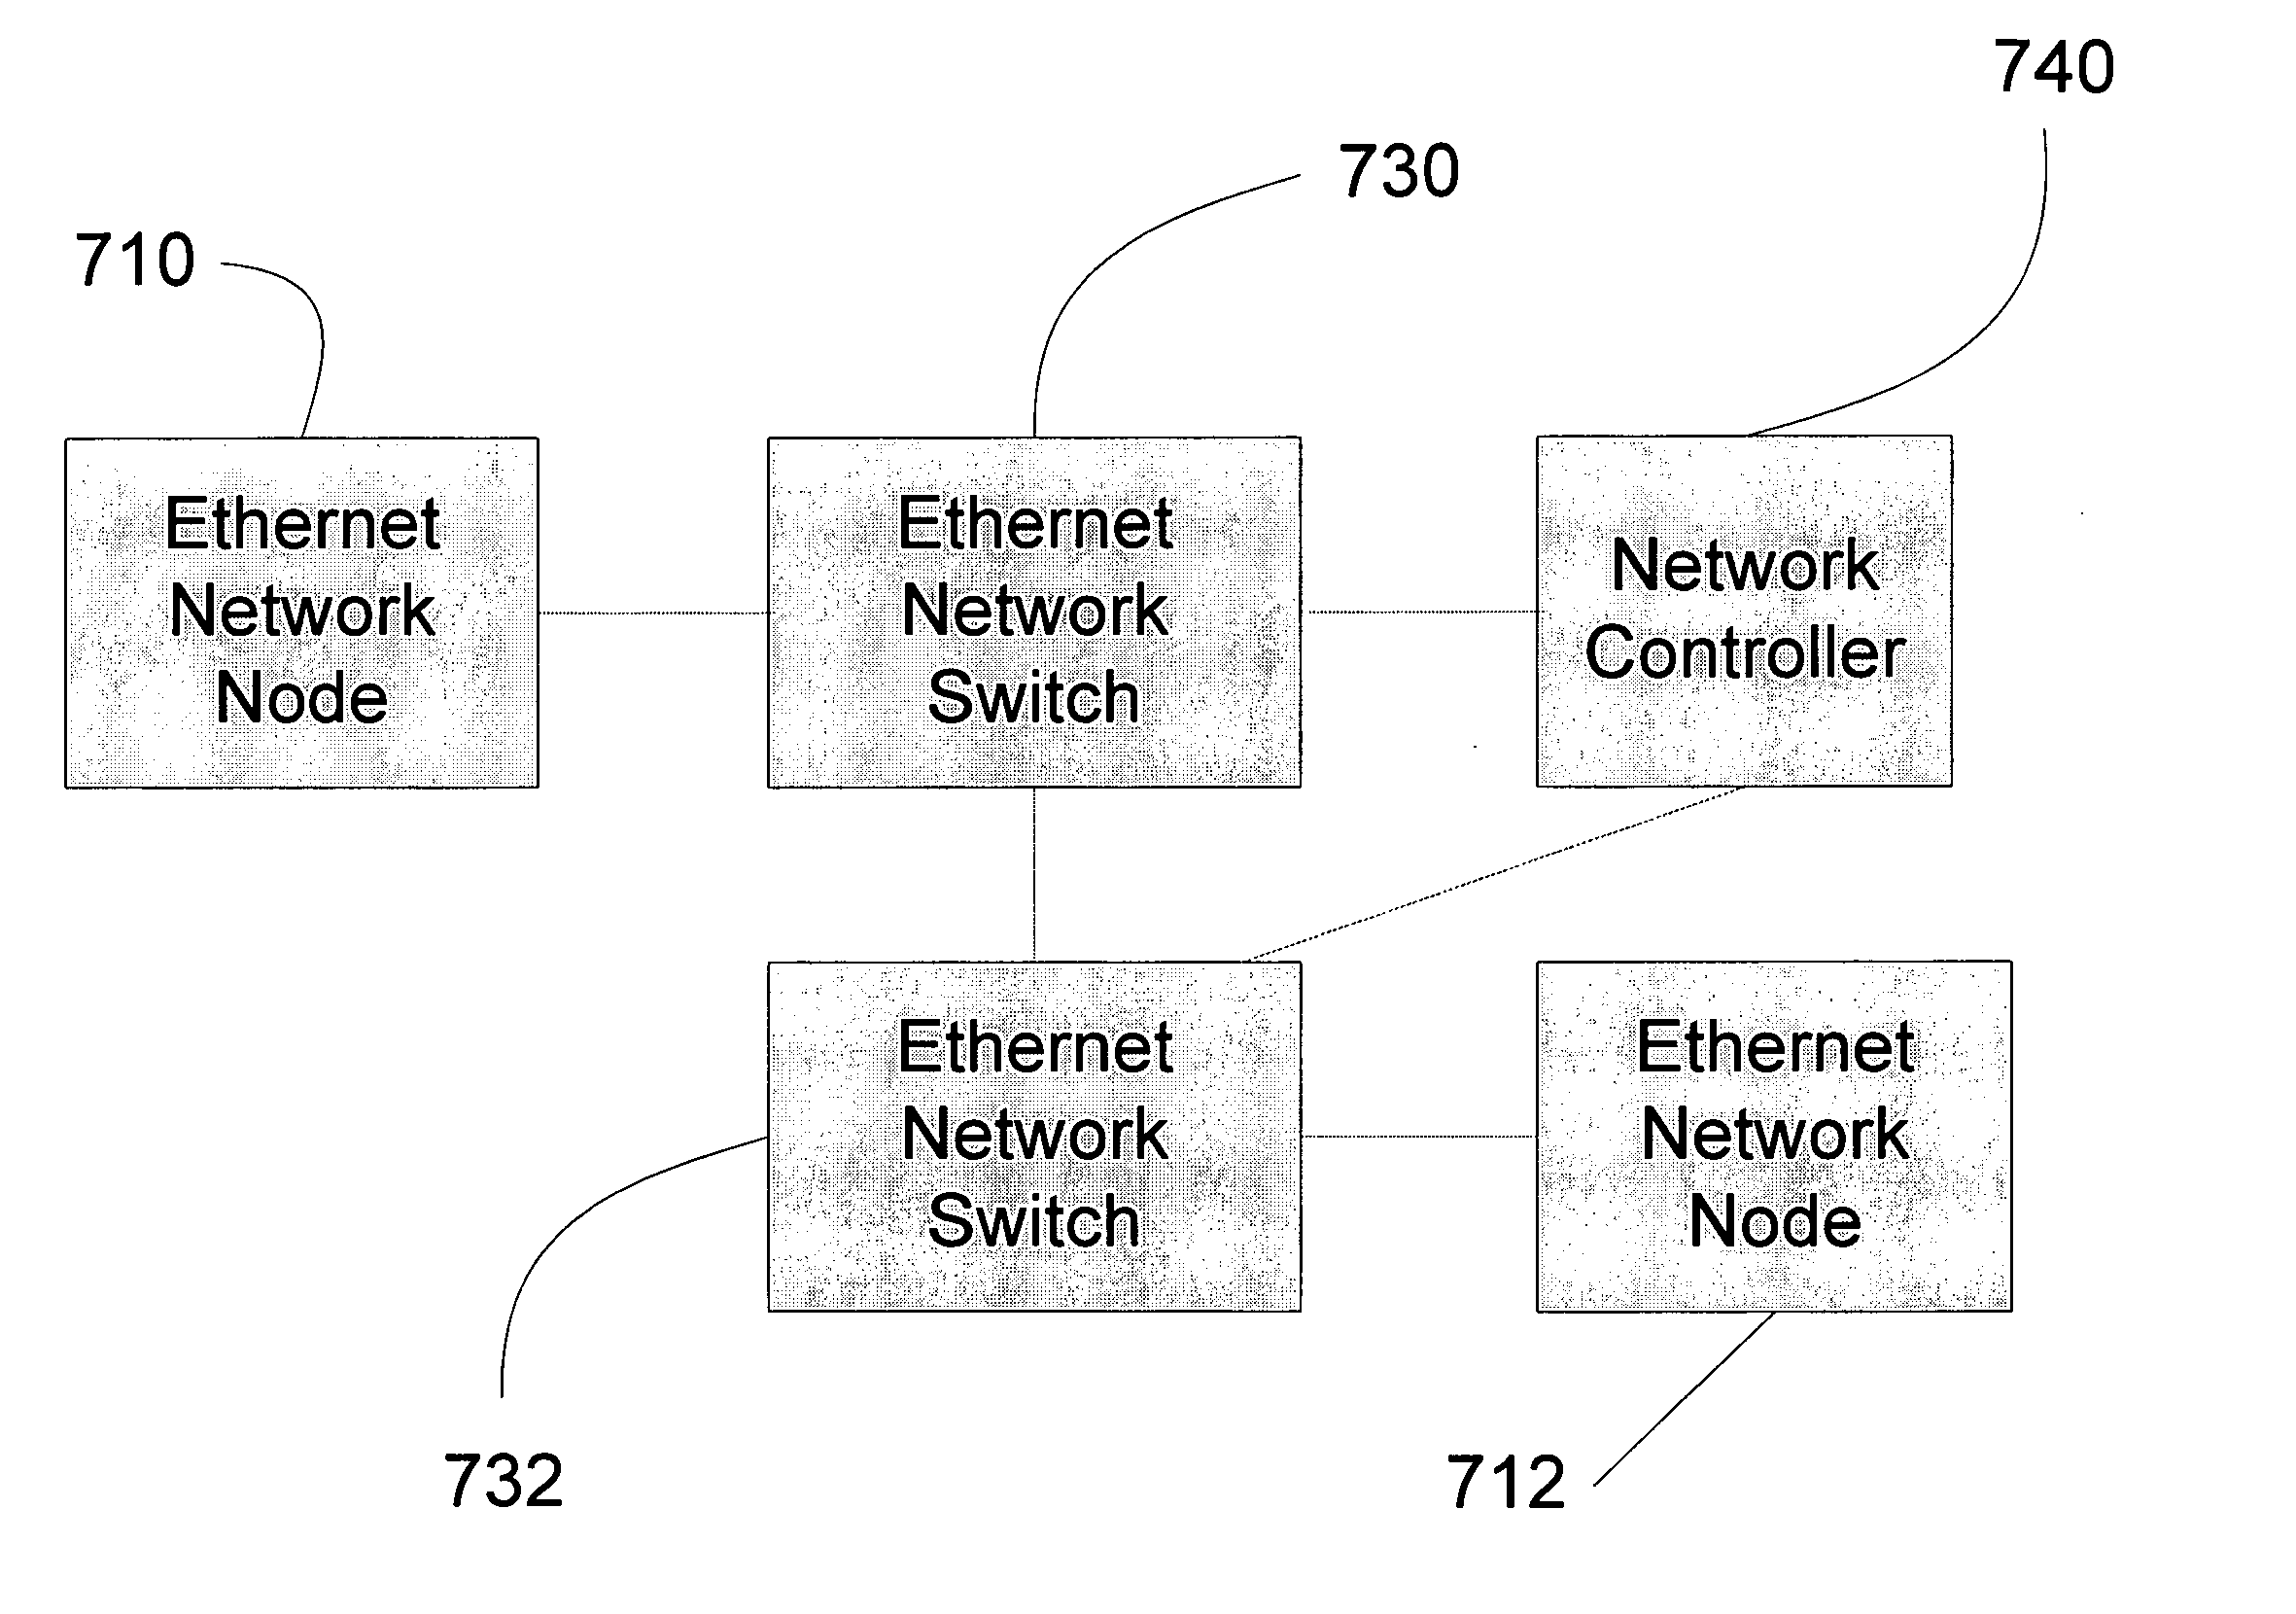 Method to dynamically create a virtual network